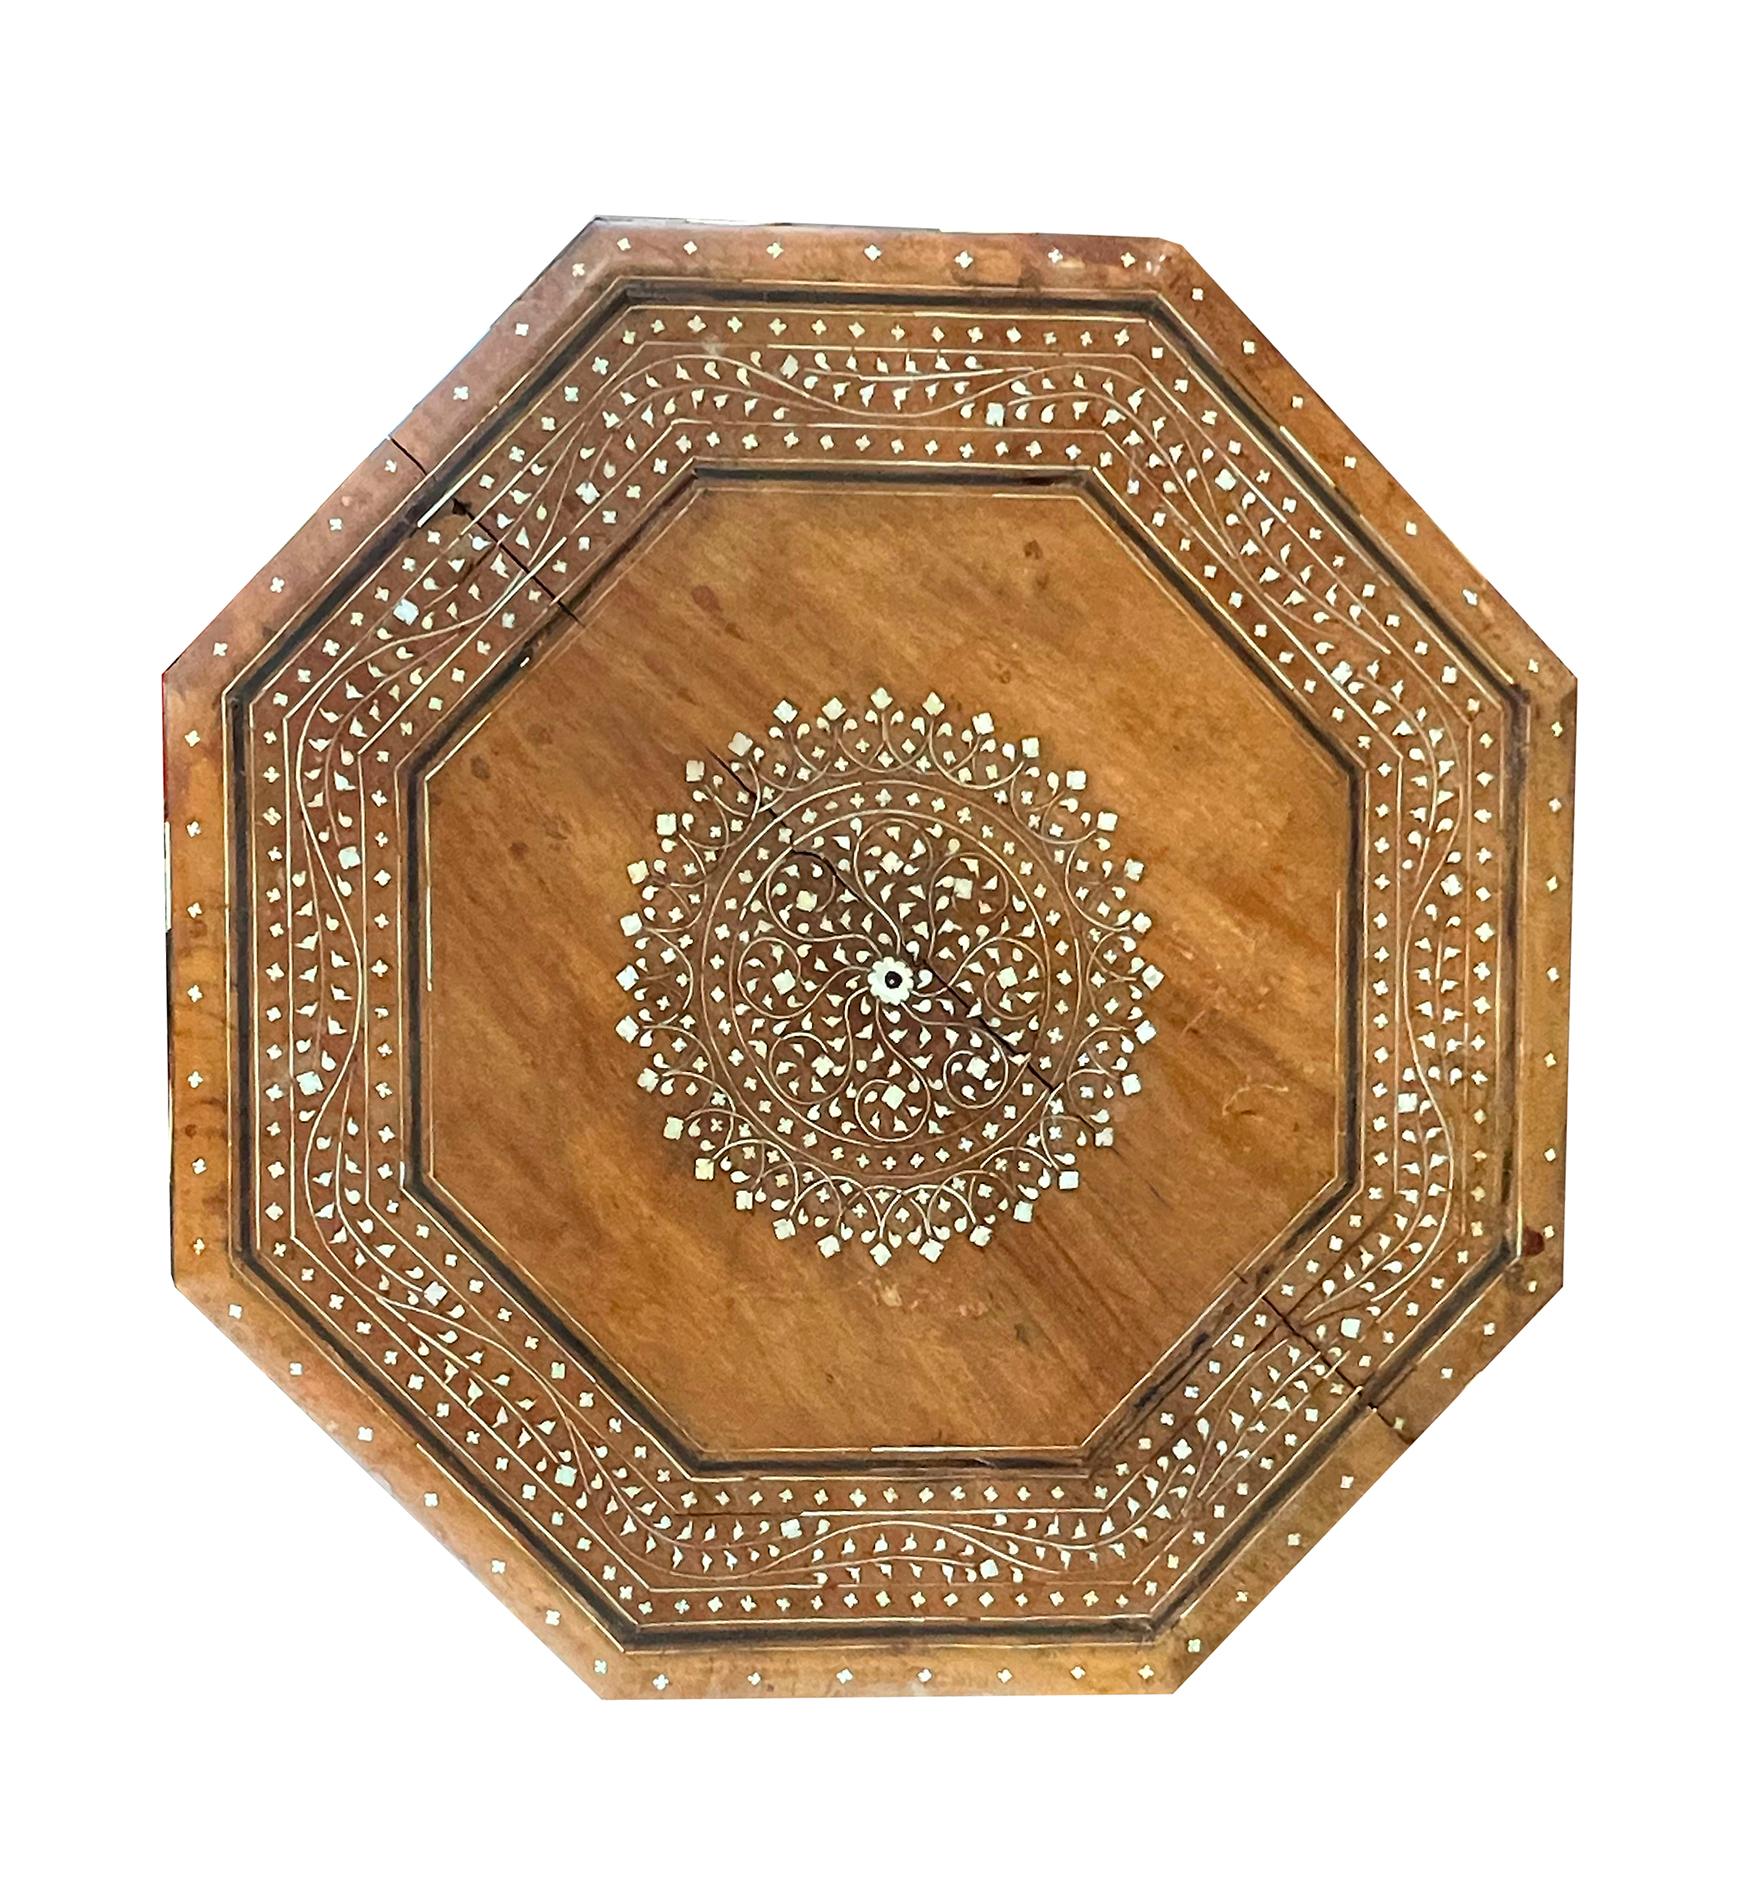 originally used as traveling tea tables for the British in India; the octagonal top with round central medallion within a border of meandering vines; raised on a hinged base with arabesque spandrels; perfect as a drinks table that can be